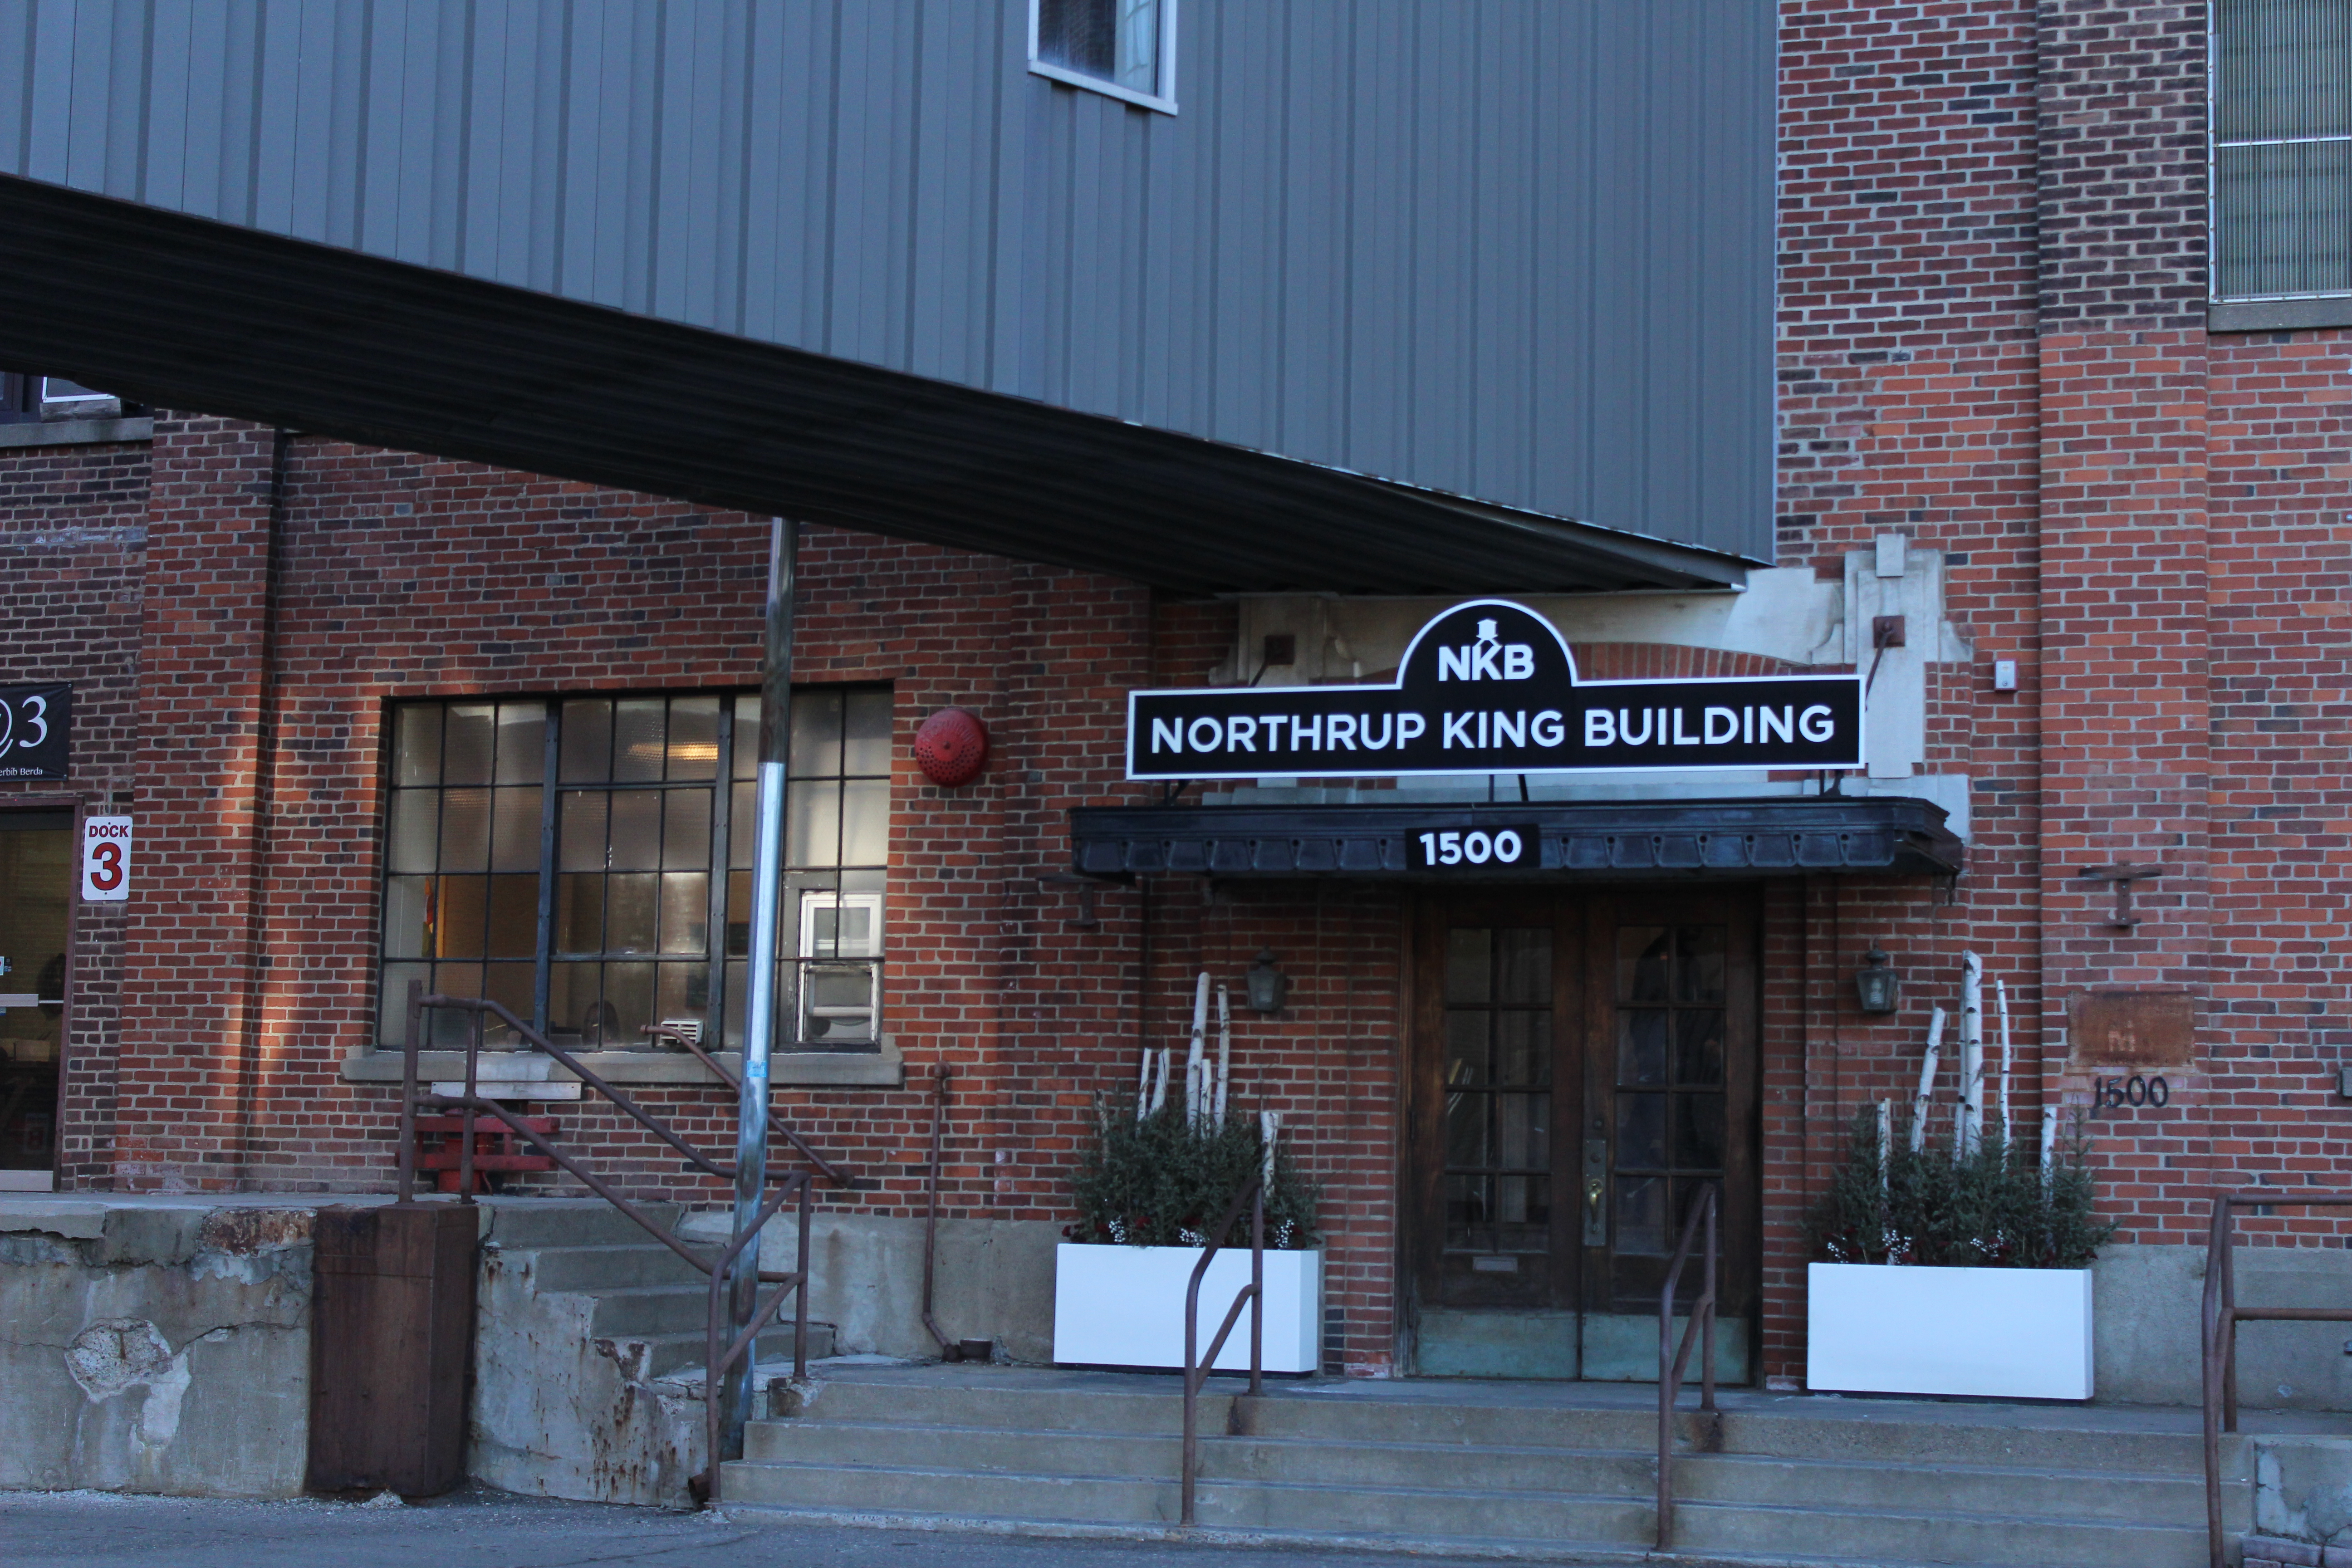 Northrup King Building exterior and signage